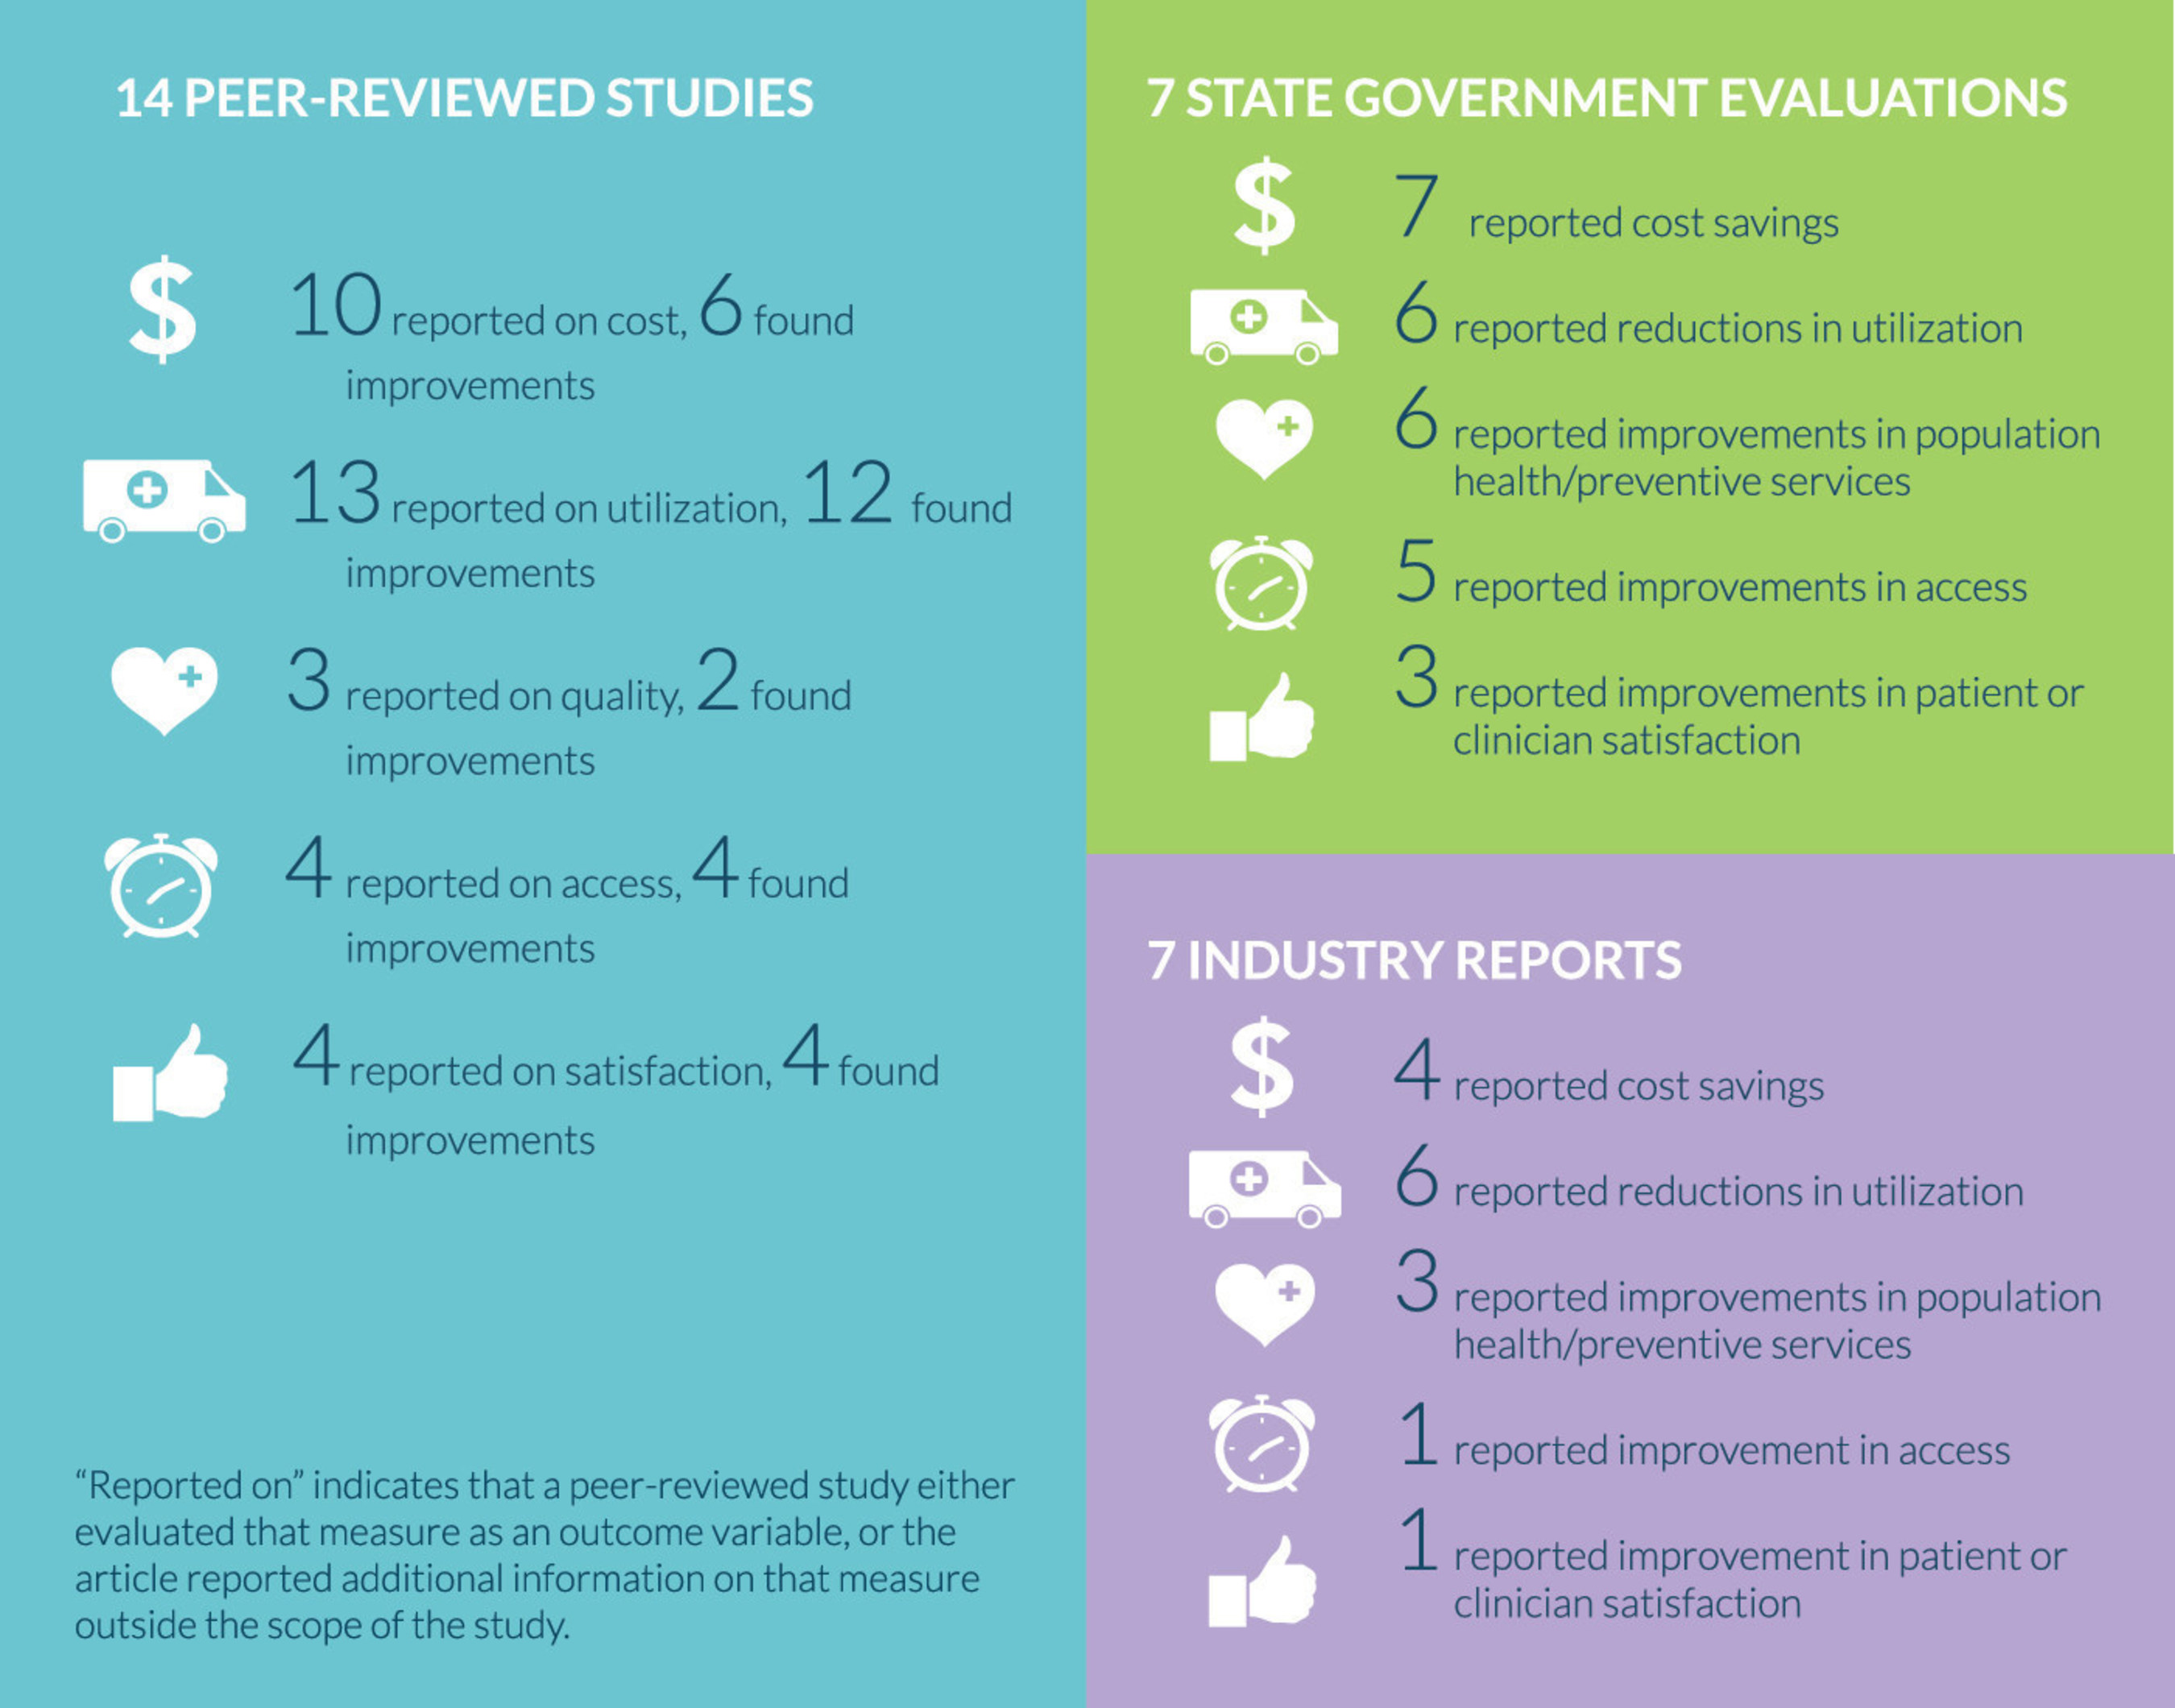 Overview of the PCMH Evidence from the Patient-Centered Primary Care Collaborative's new report titled, The Patient-Centered Medical Home's Impact on Cost and Quality, Annual Review of Evidence, 2013-2014.